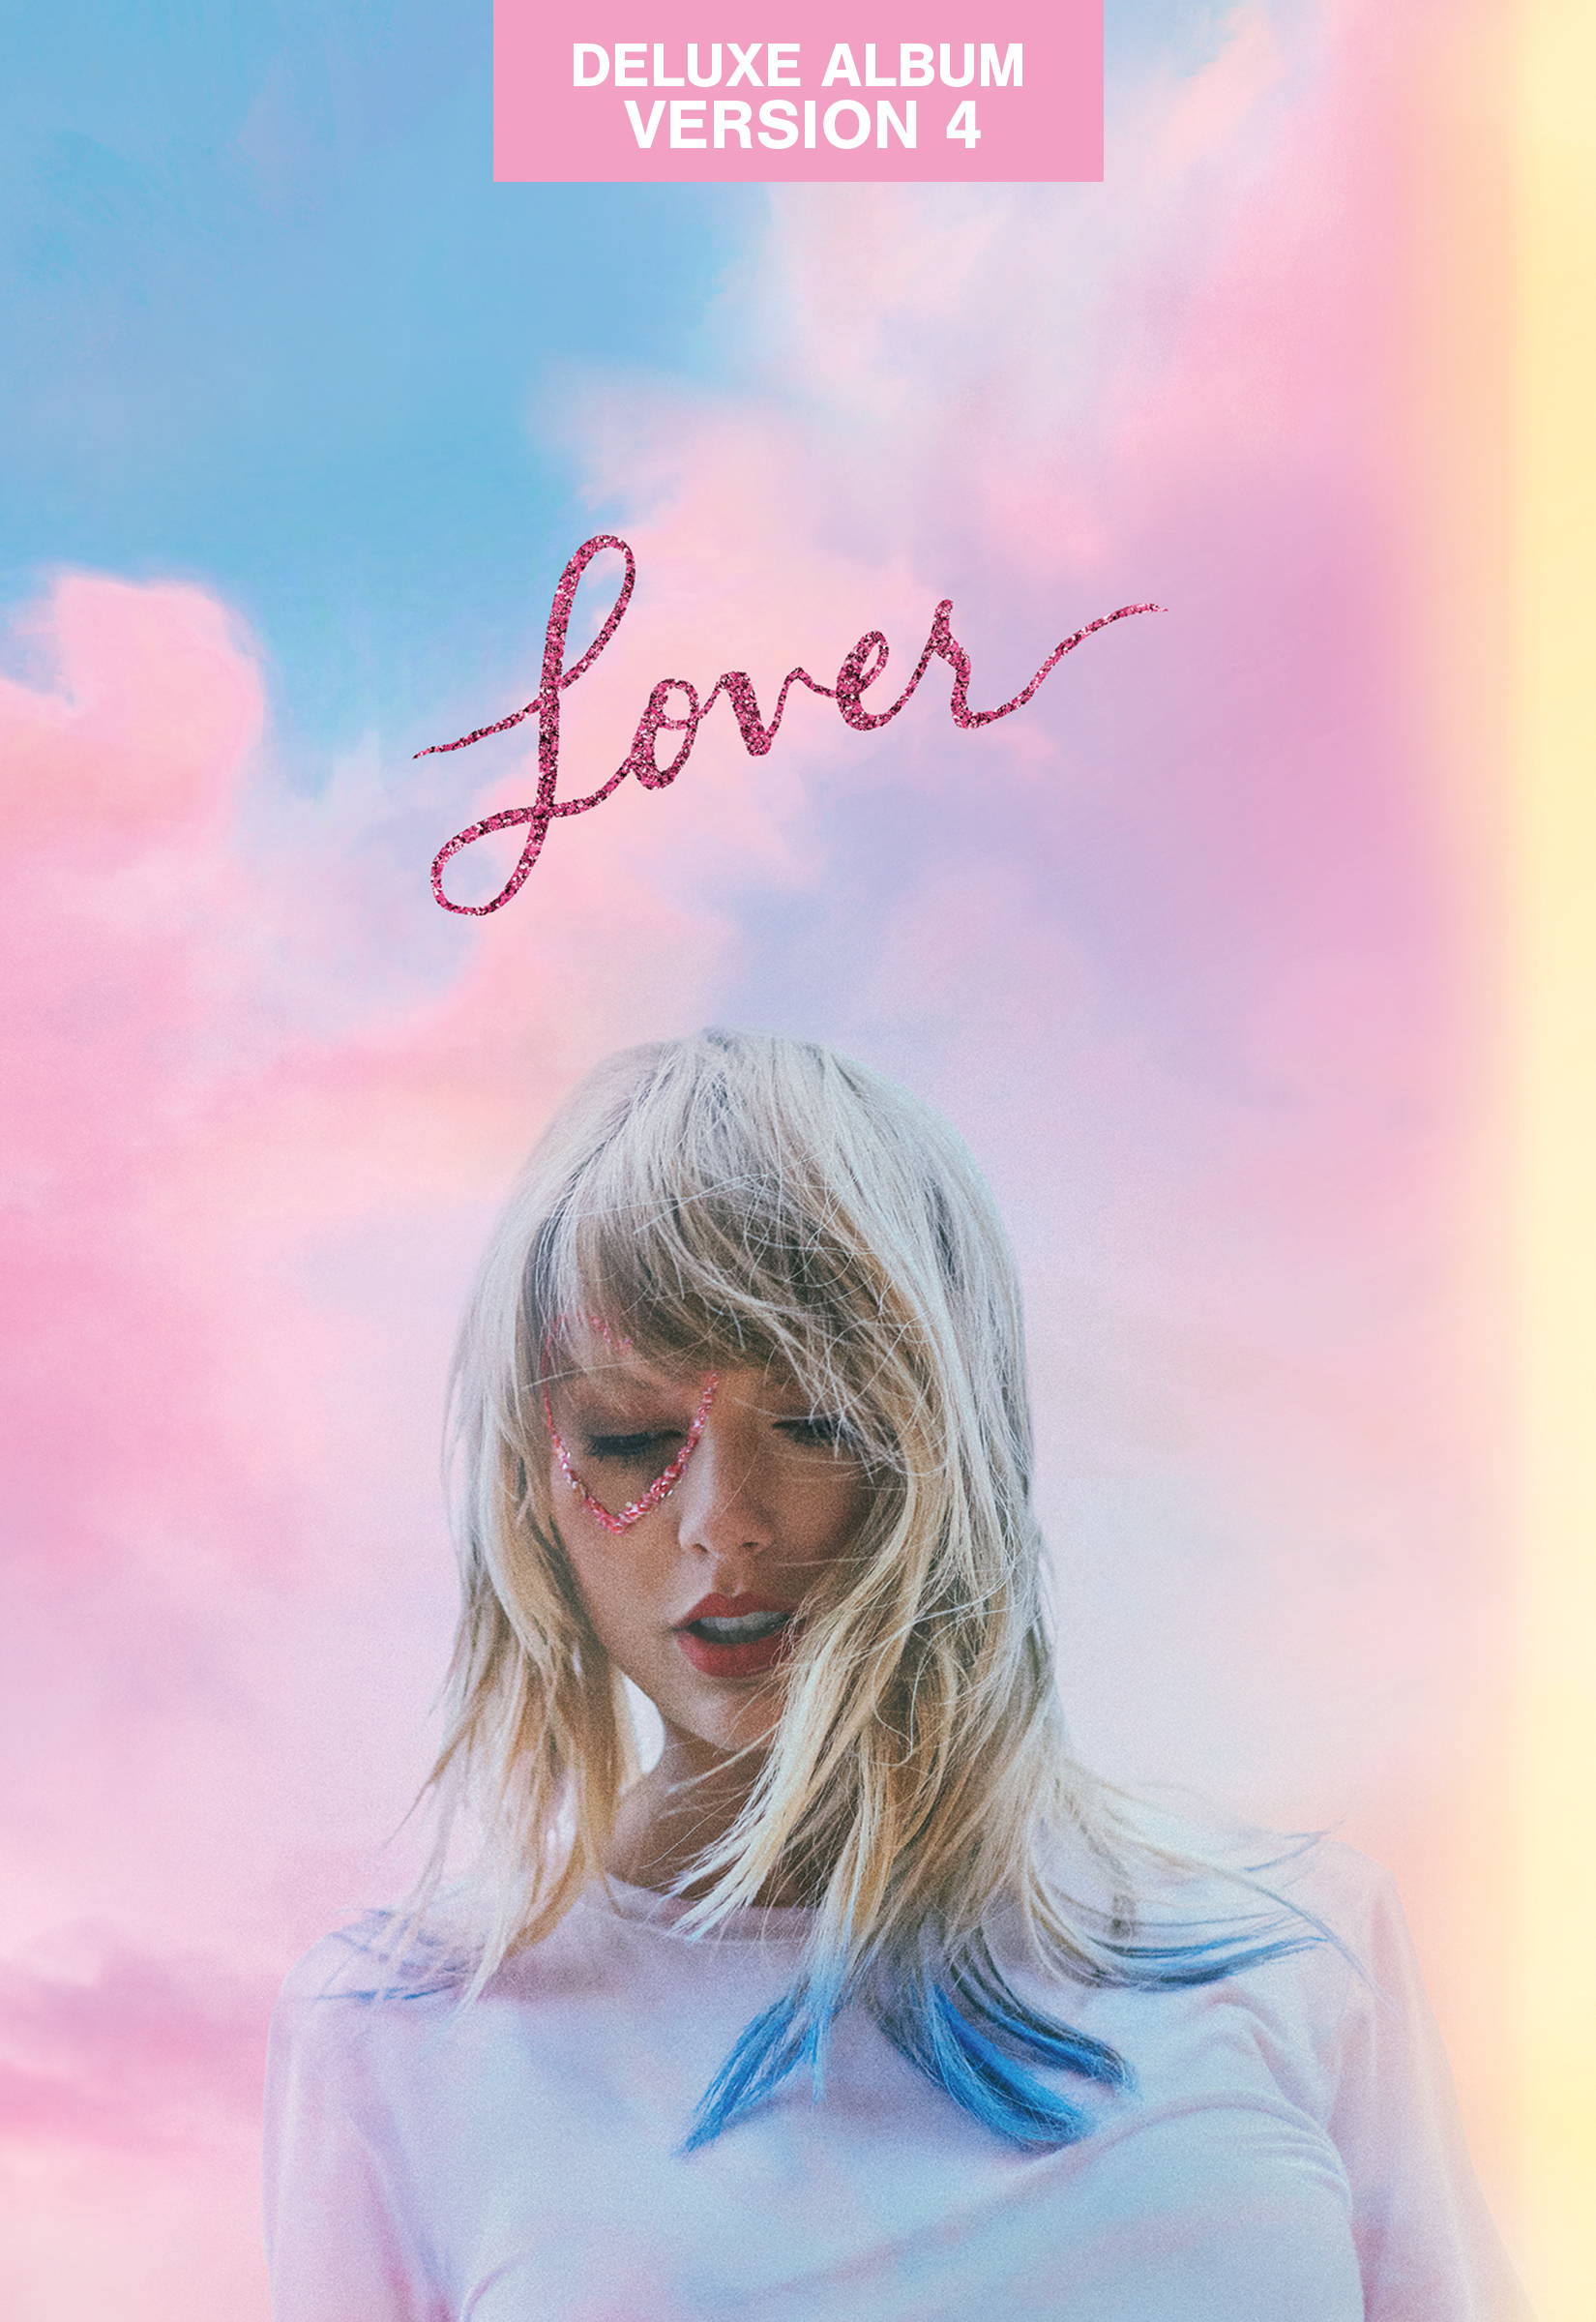 Deluxe Version 4 of Taylor Swift's new album Lover